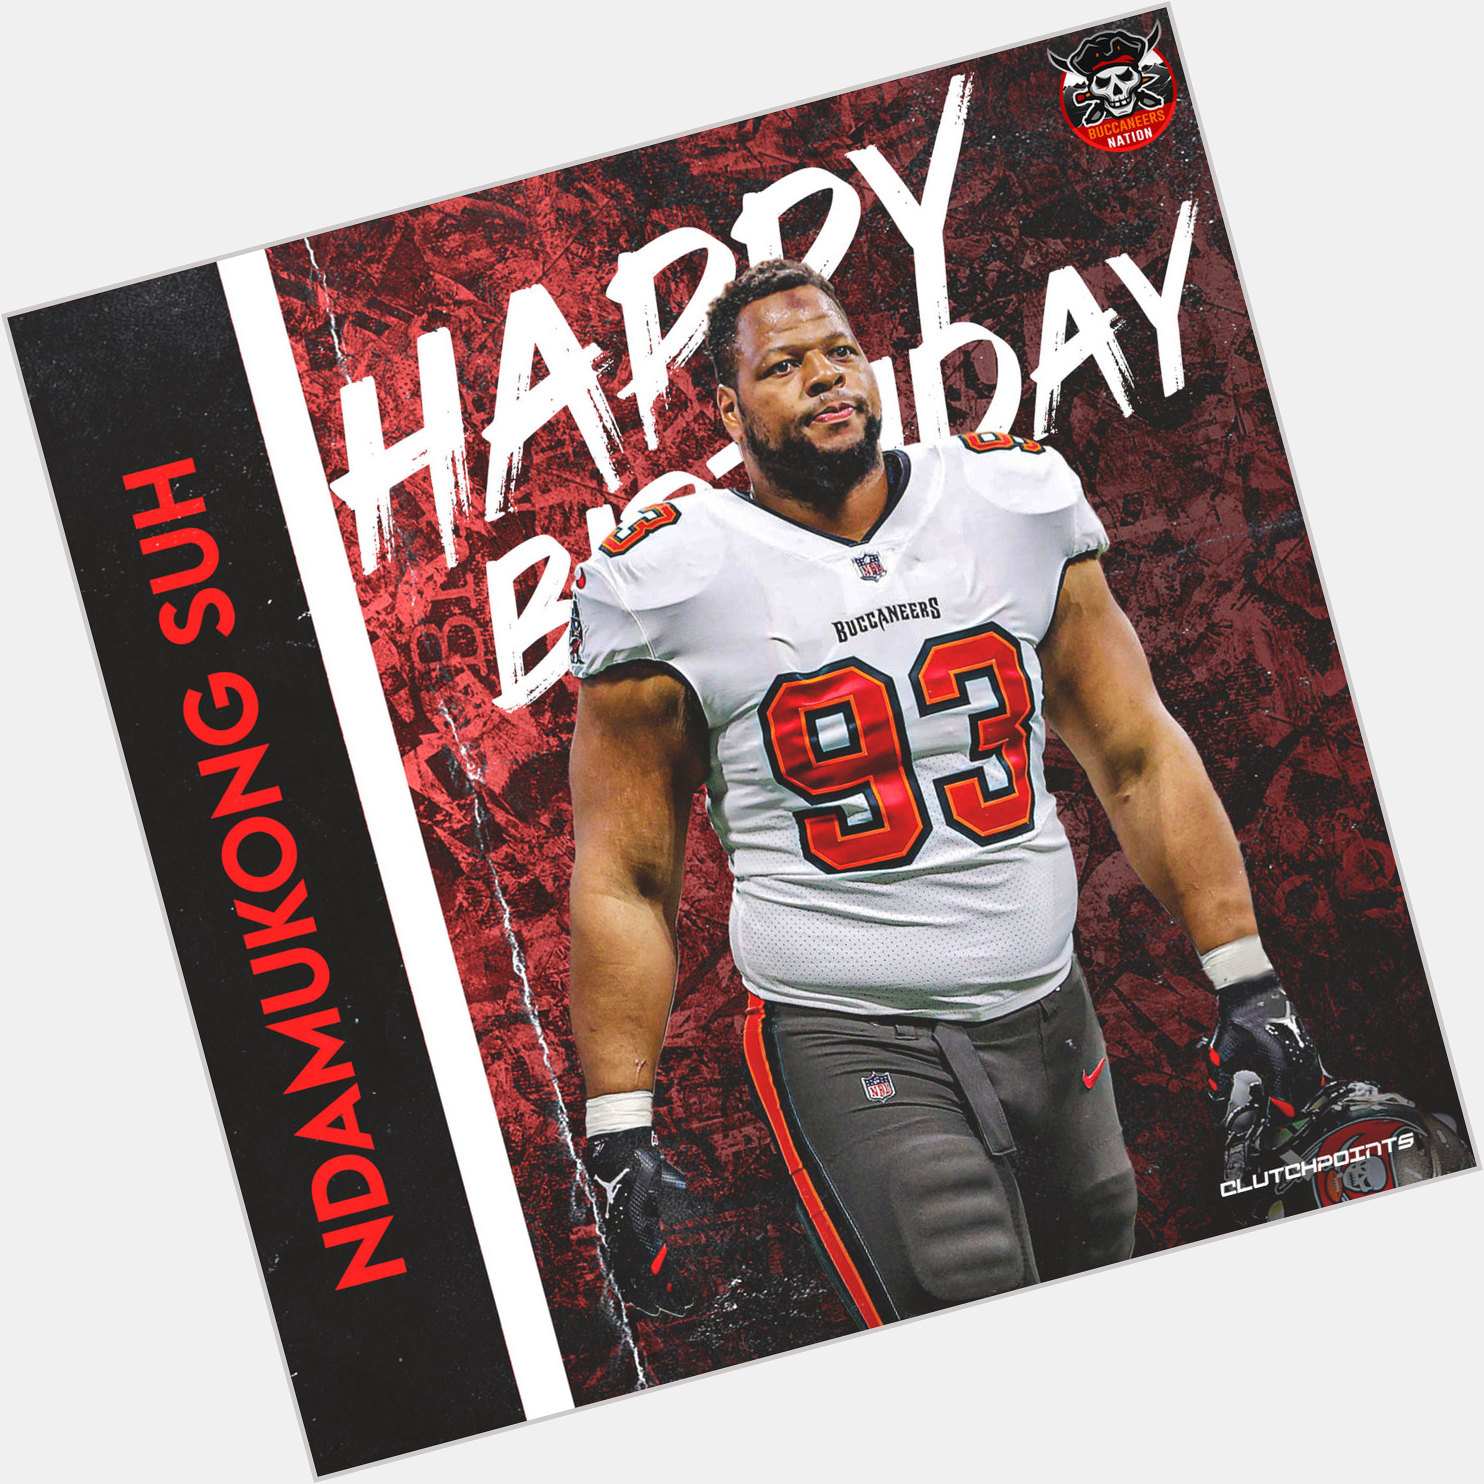 Bucs Nation, join us in wishing Ndamukong Suh a happy 35th birthday! 